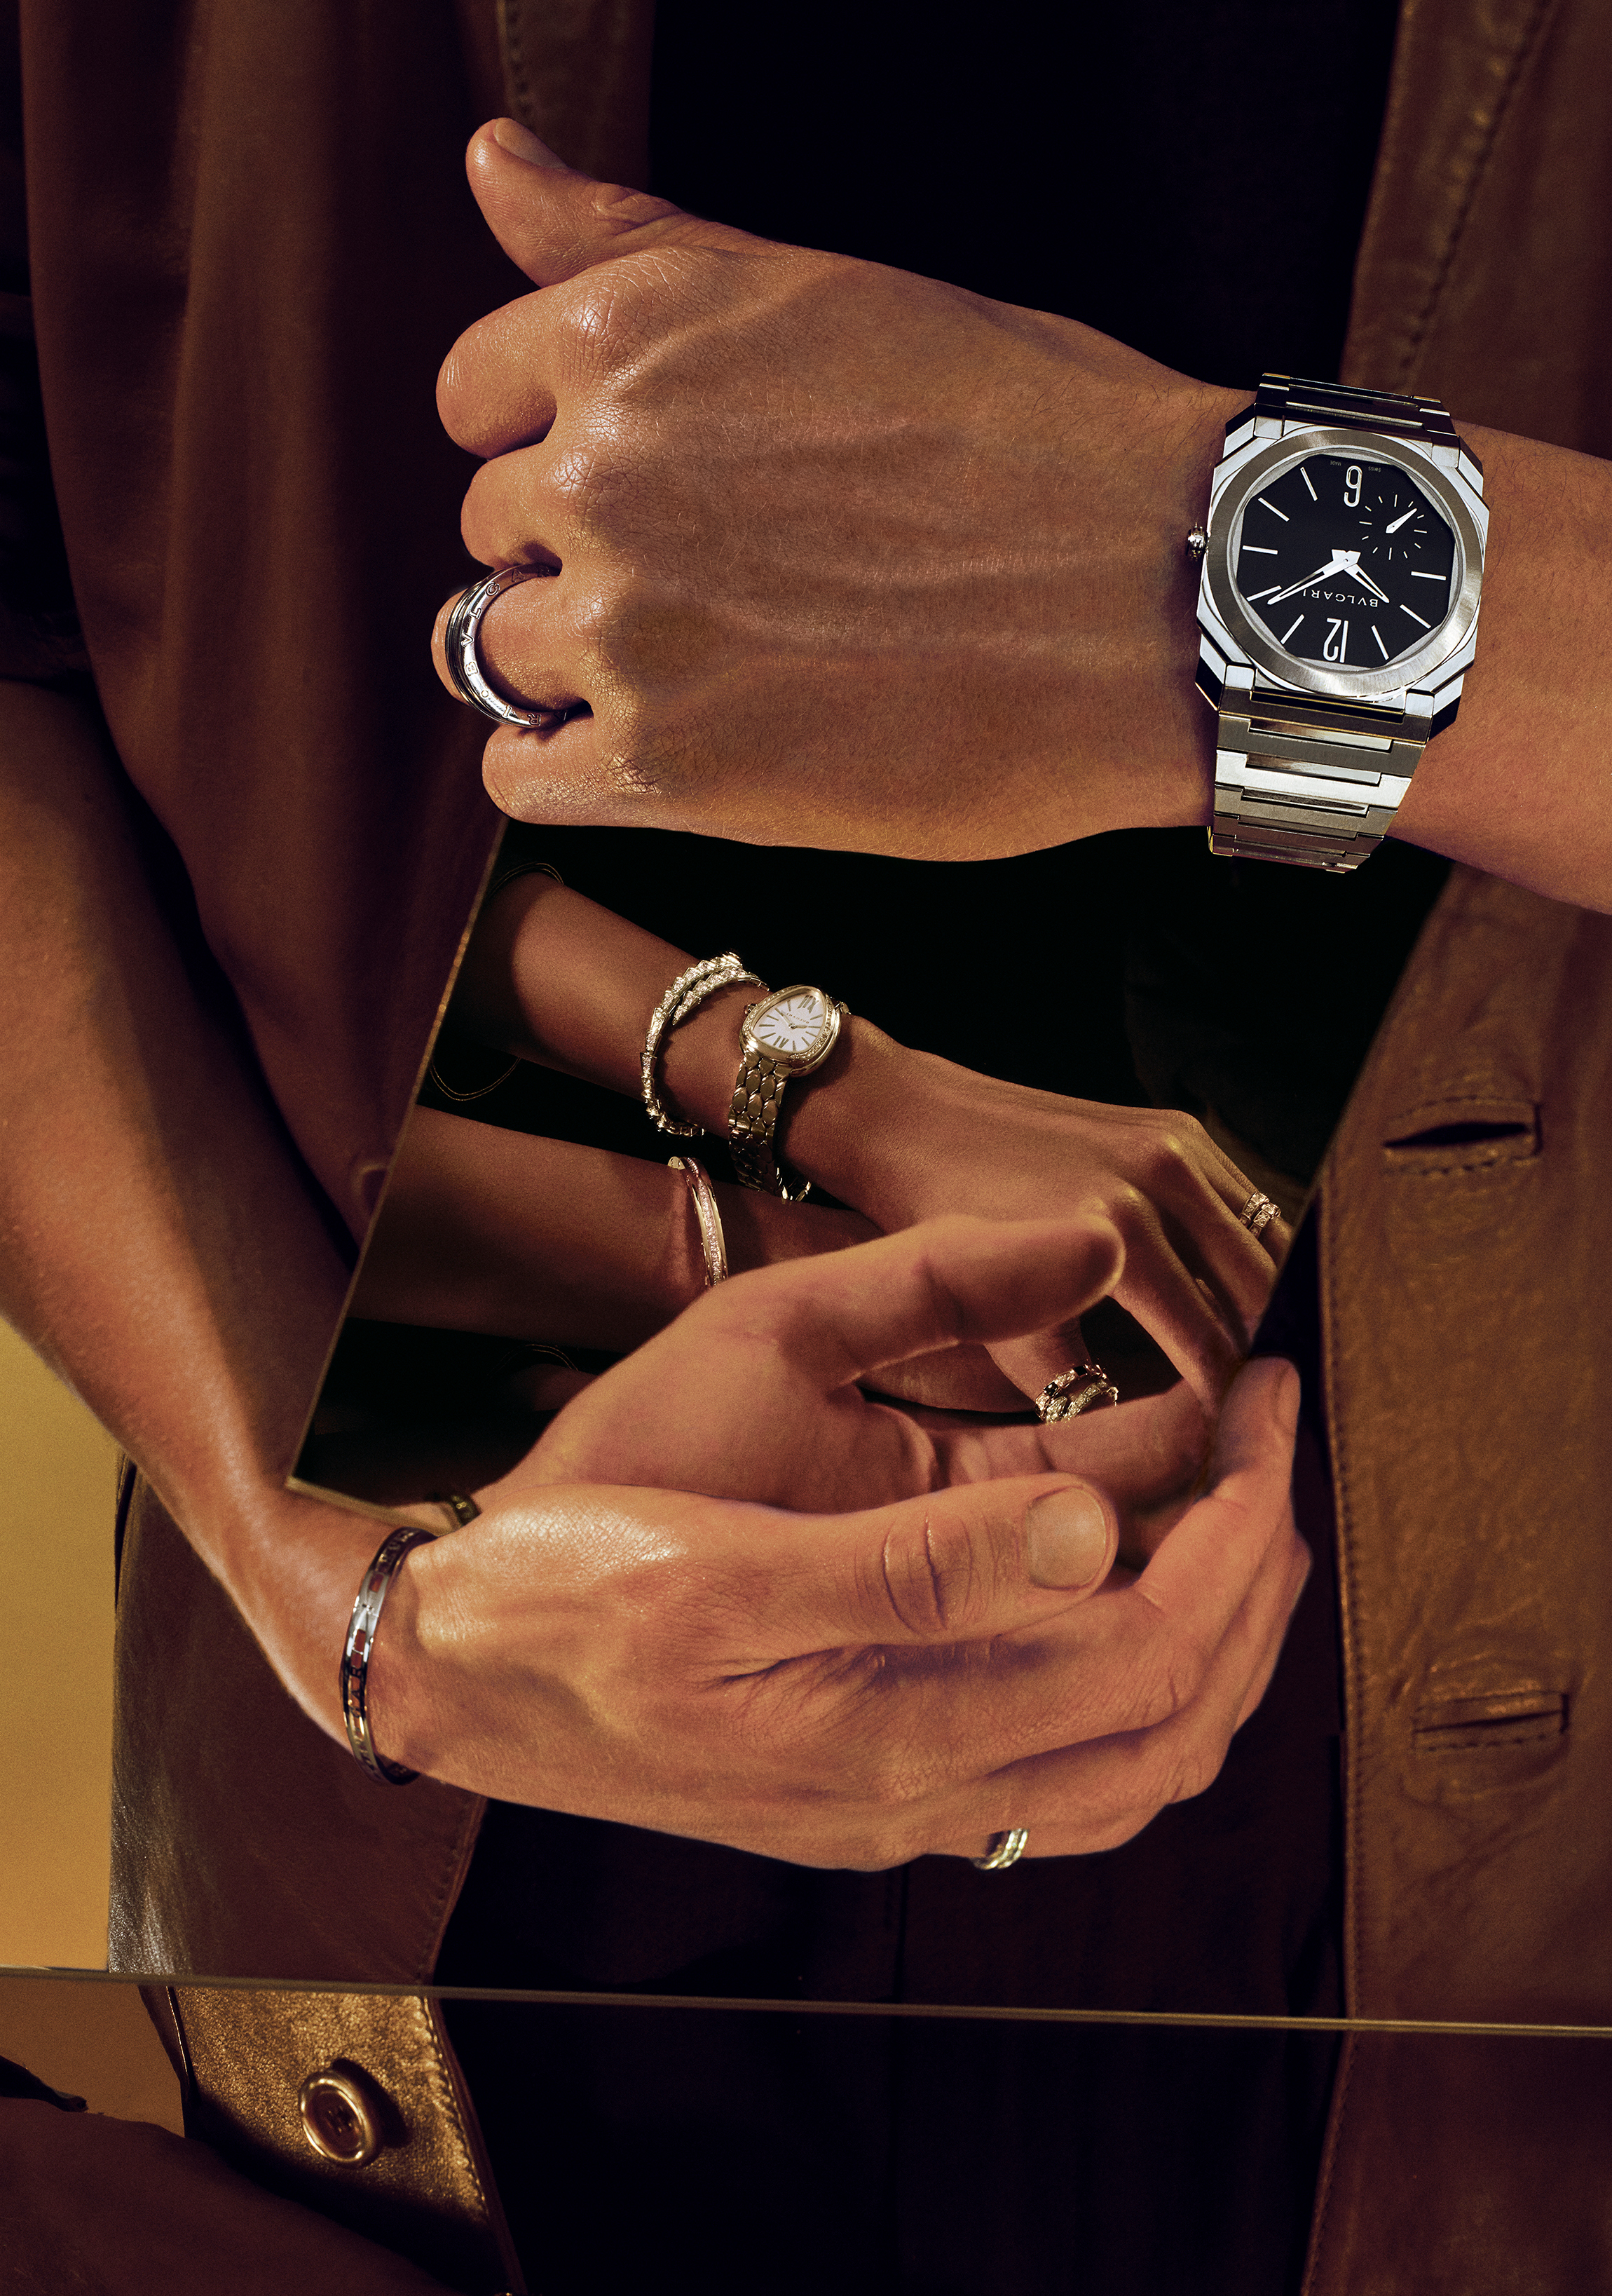 The Bvlgari 2020 Novelties offers a wide range of timepieces that cater to both men and women.